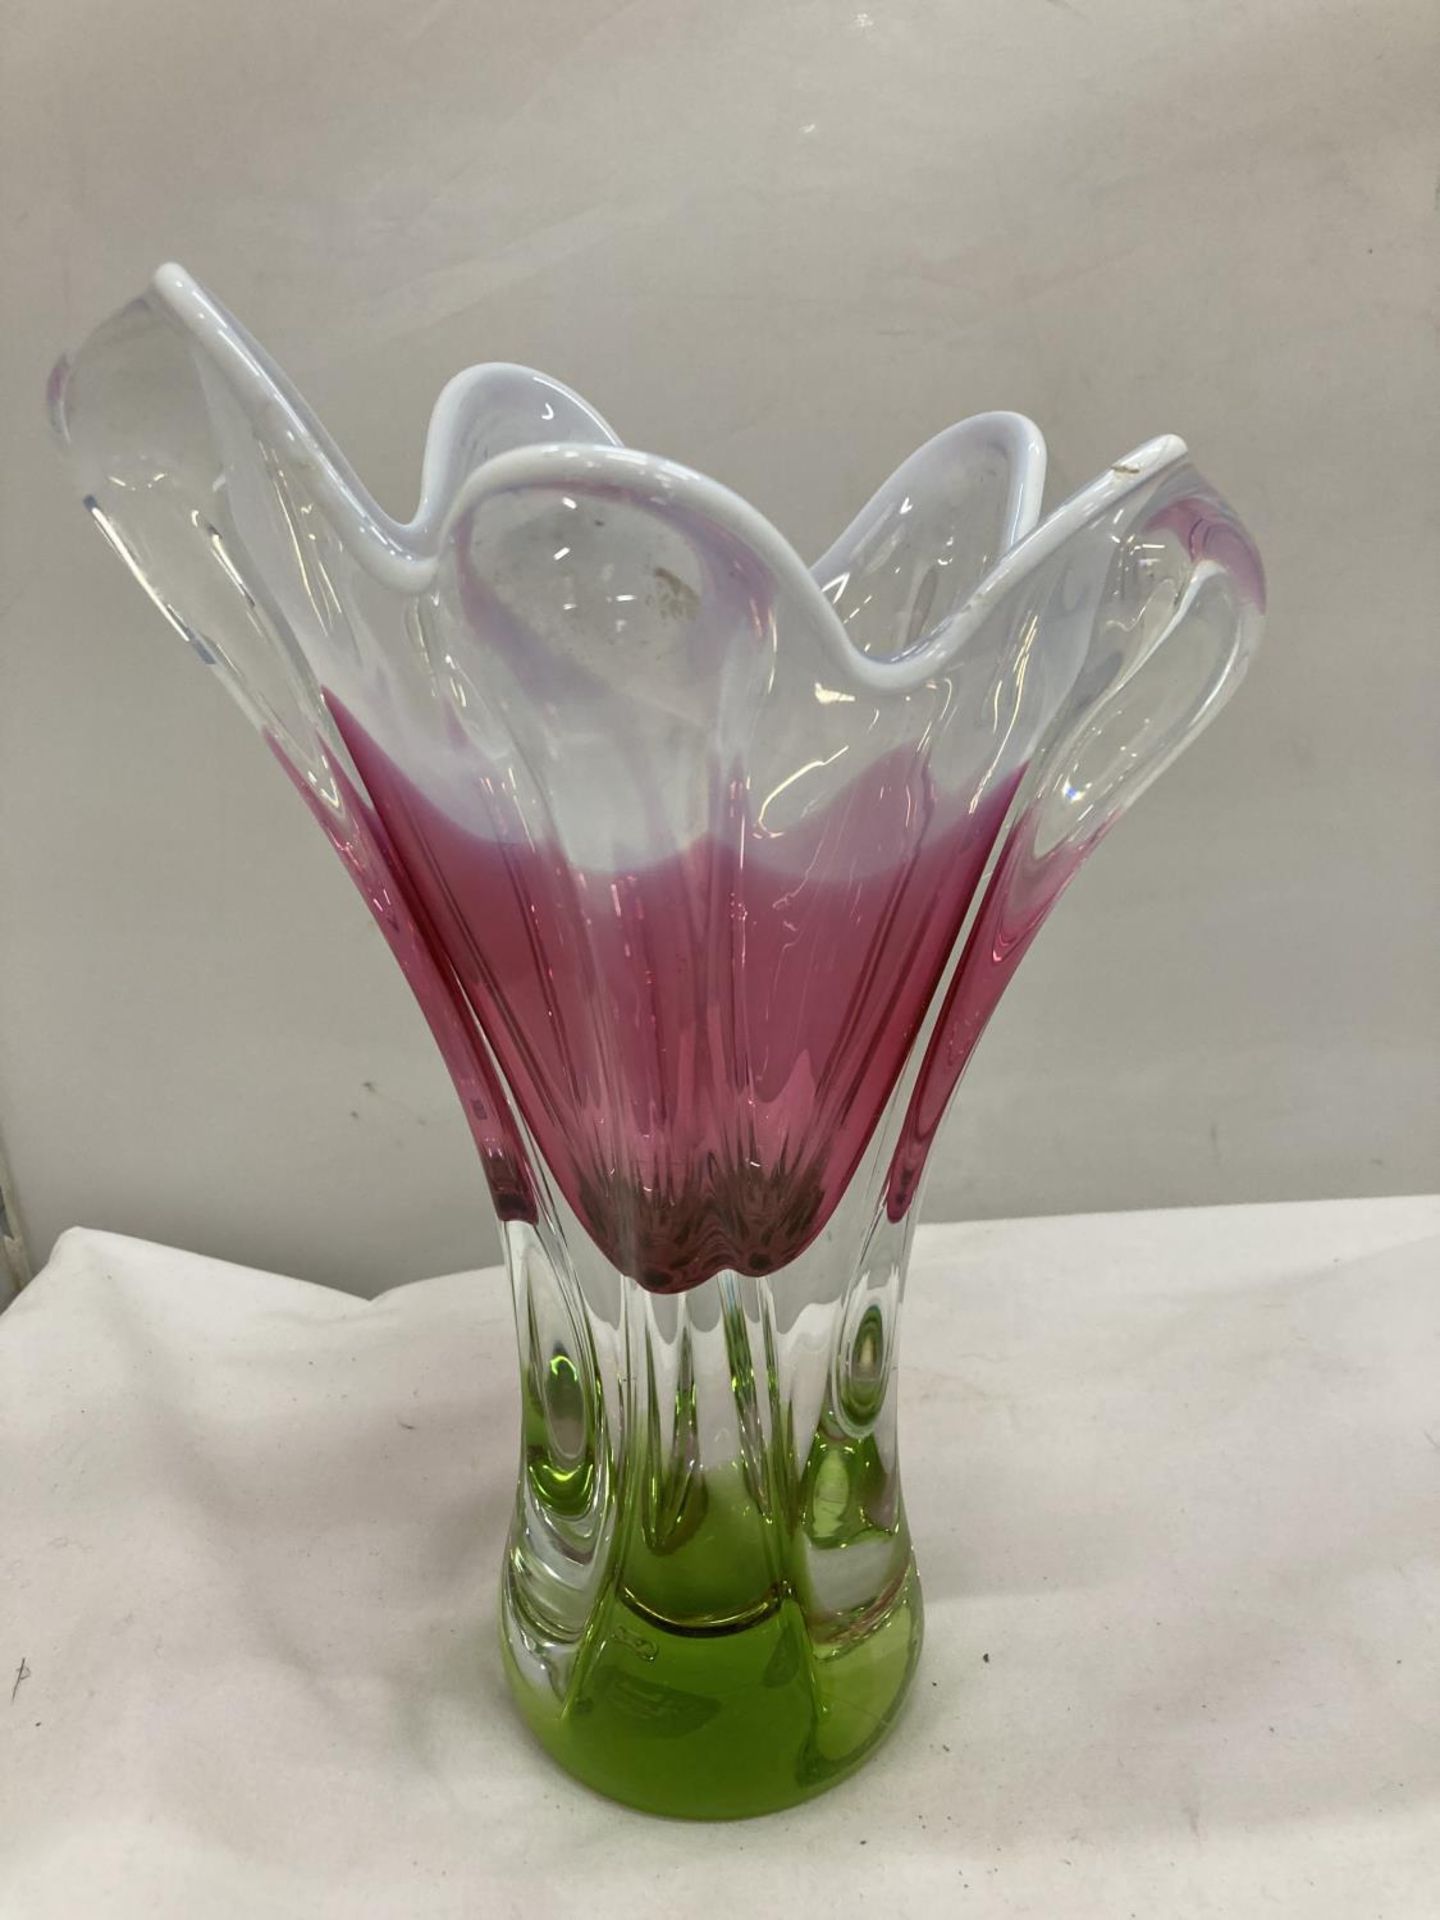 A MURANO STYLE HEAVY ART GLASS VASE WITH GRADUATING COLOURS OF GREEN, CRANBERRY AND ACID WHITE - - Image 10 of 17